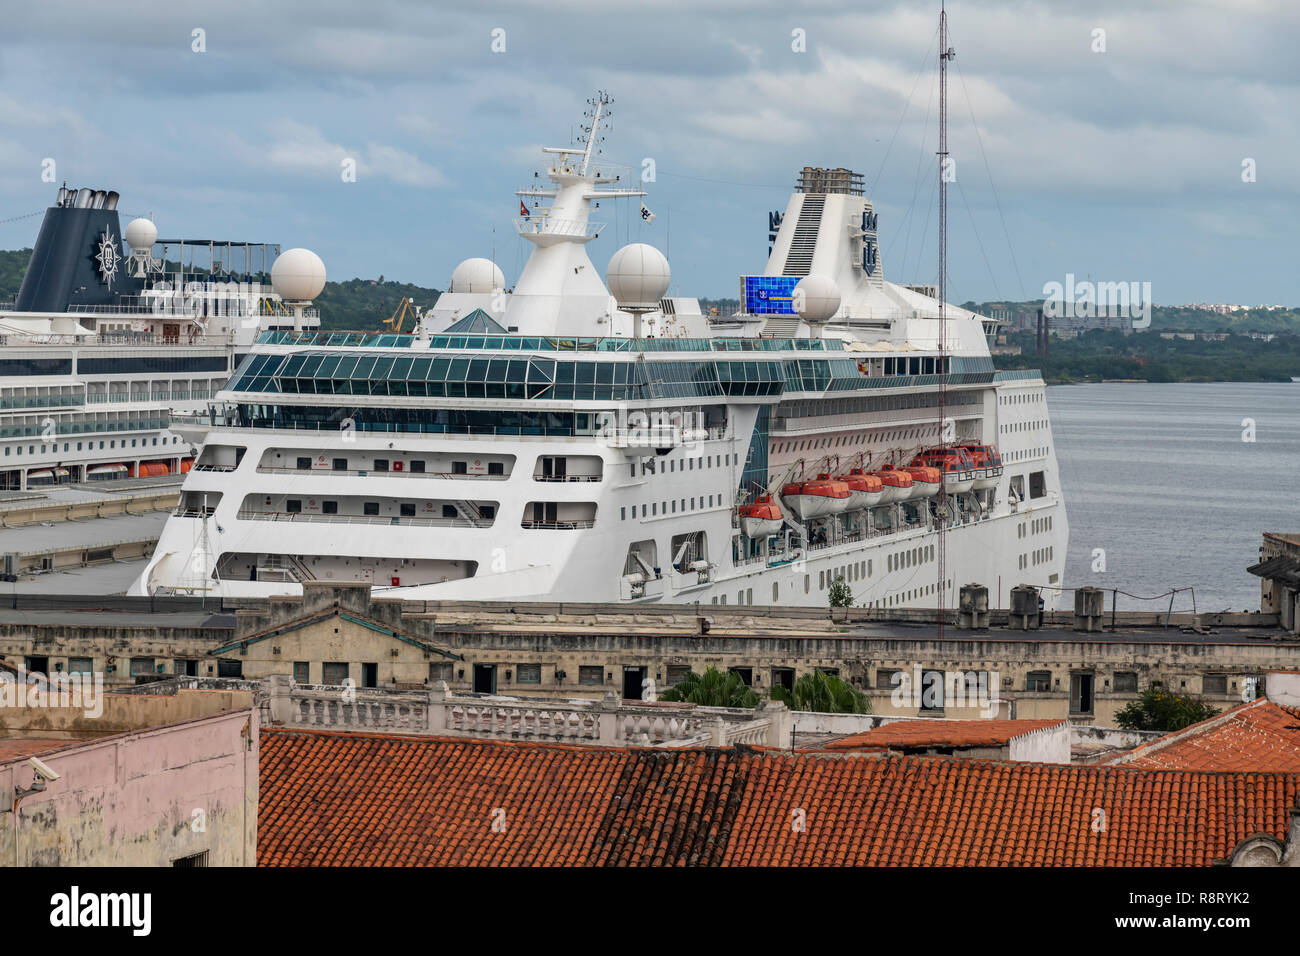 The huge cruise ship Empress of the Seas in Havana's tiny port, Terminal Cruceros. Shot from the roof of the Camera Obscura, Plaza Vieja. Cuba. Stock Photo